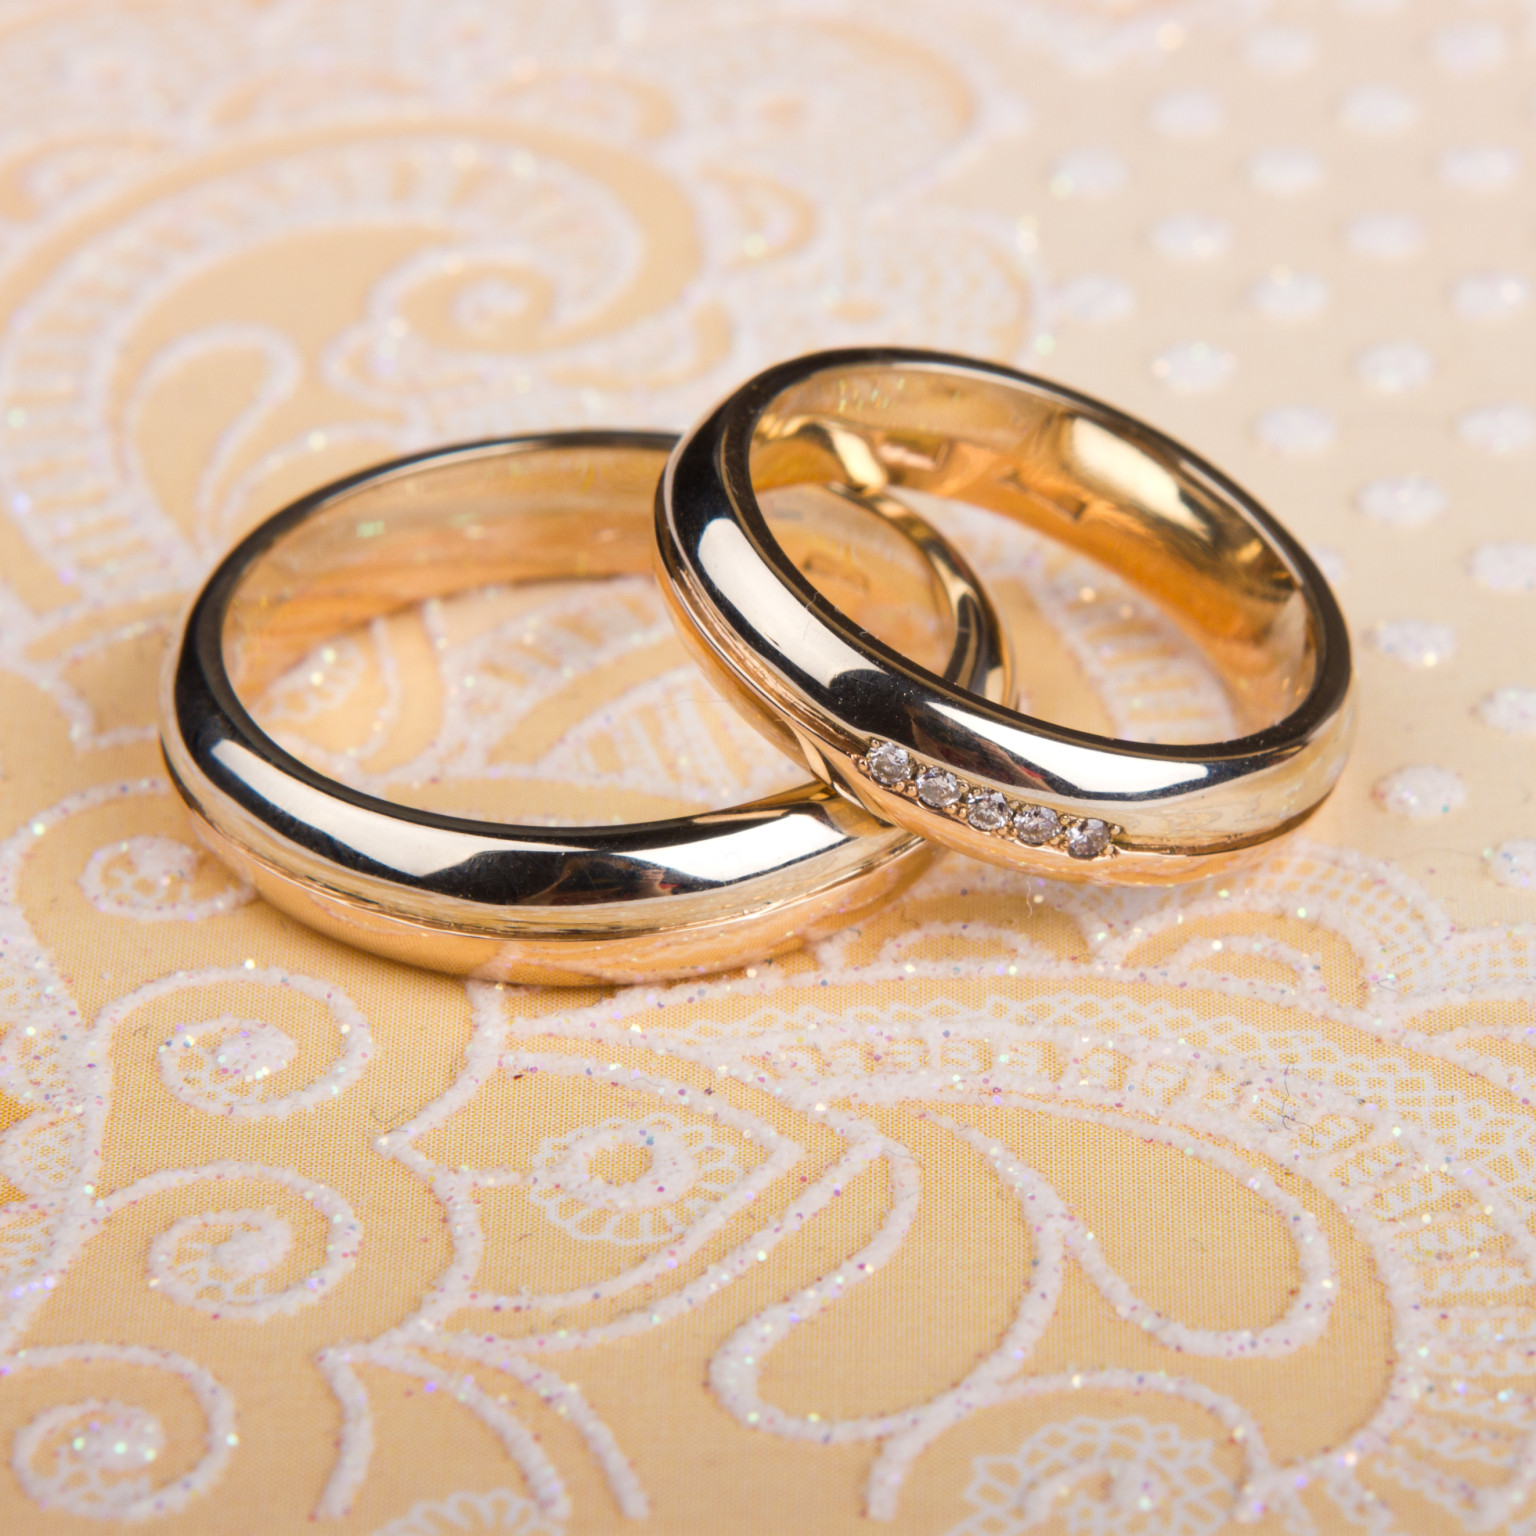 Making Promises: What Does a Wedding Ring Represent? | HuffPost